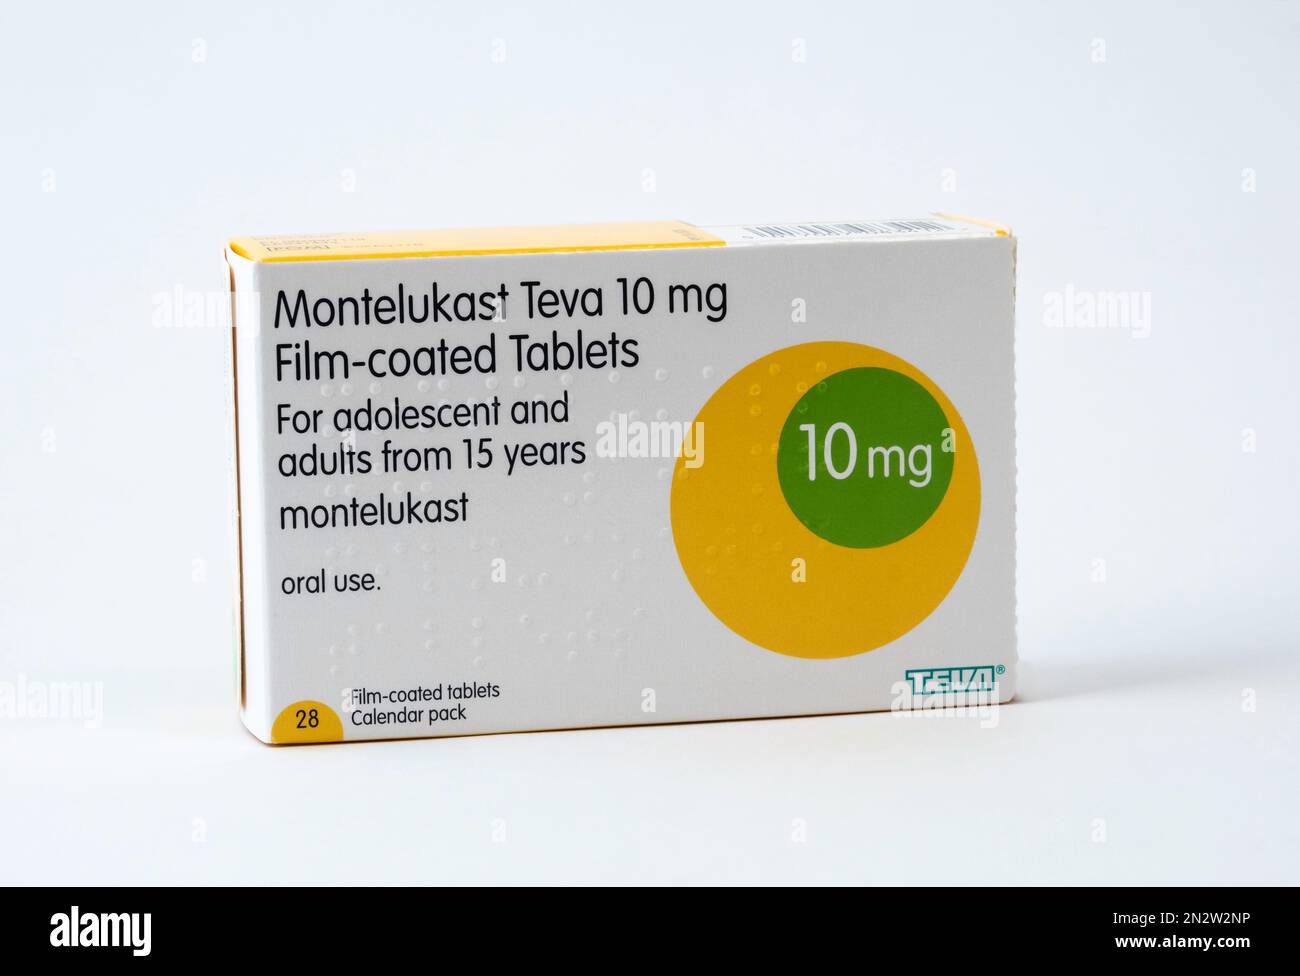 Montelukast: drug used in the treatment of asthma. Stock Photo